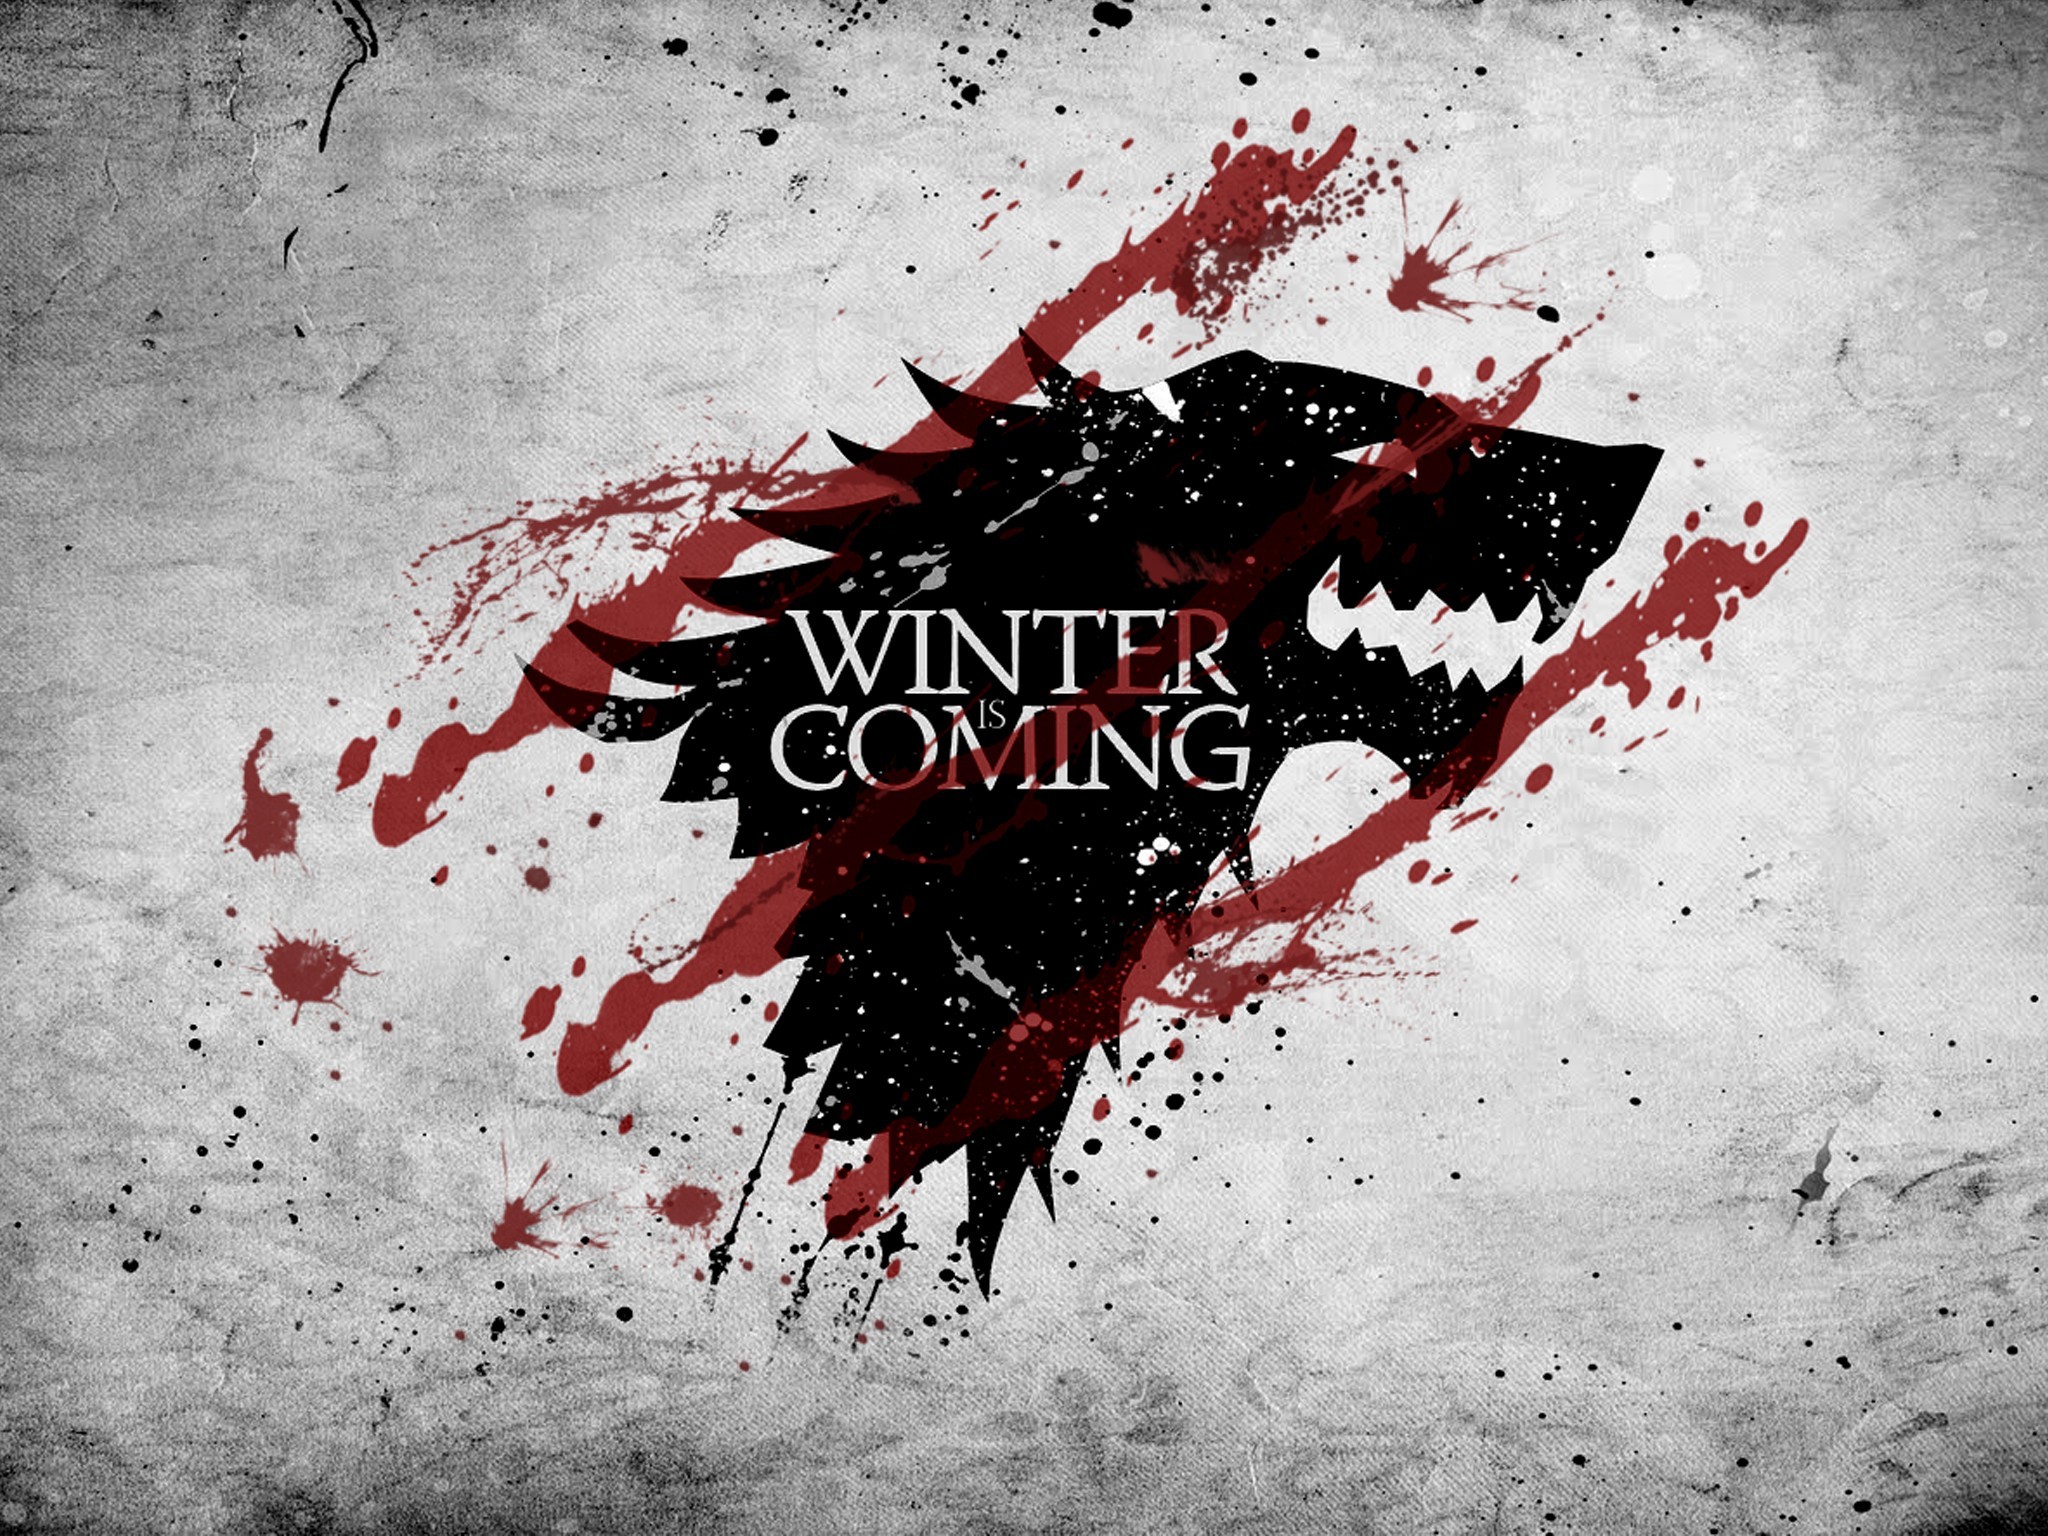 Game Of Thrones, House Stark, A Song Of Ice And Fire, Winter Is Coming Wallpaper